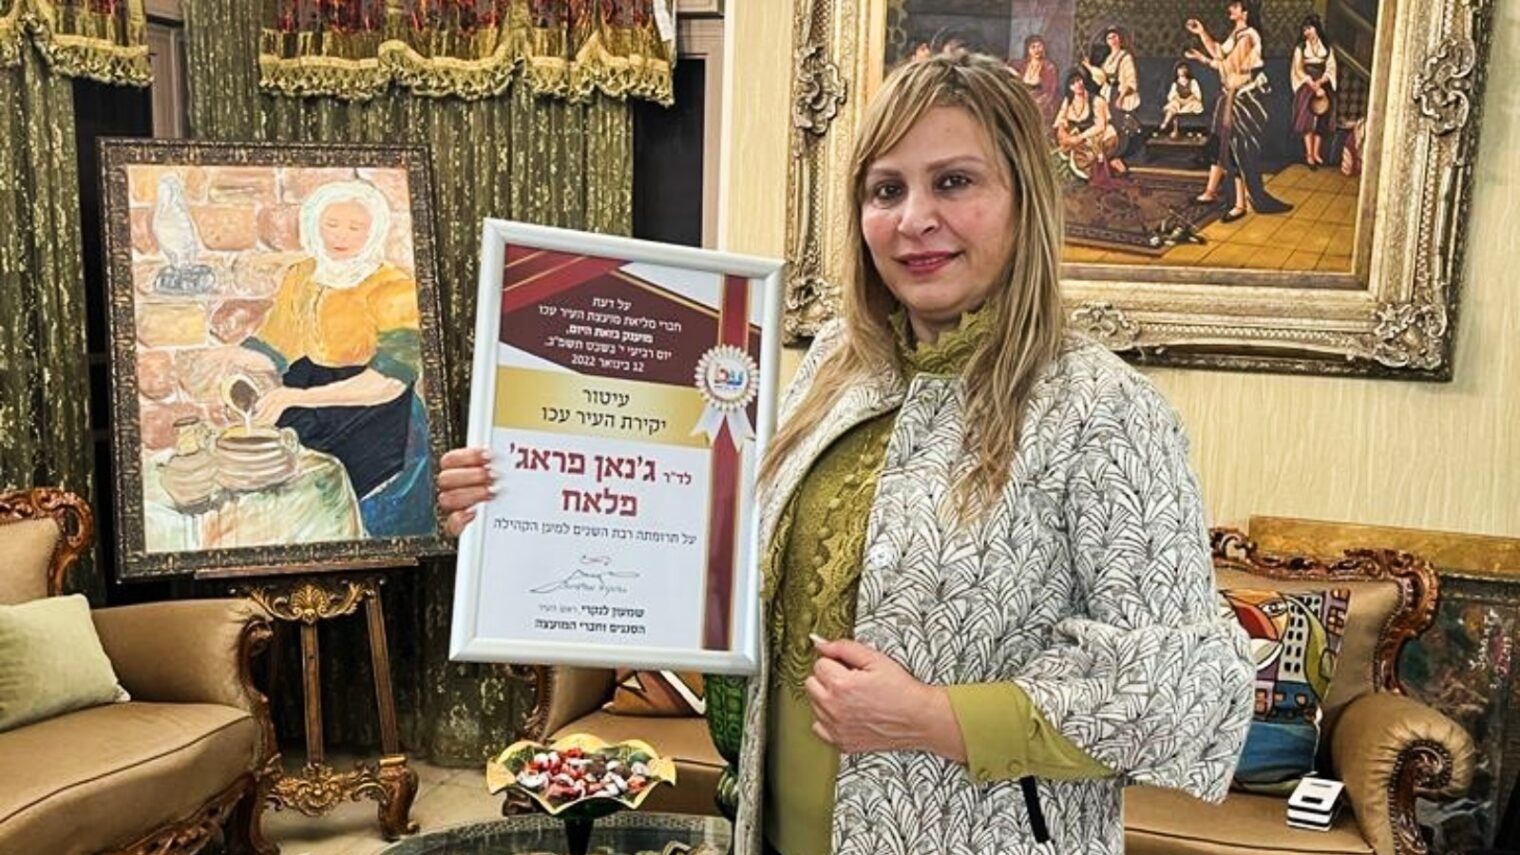 The Druze woman helping Israelis learn to live together - ISRAEL21c